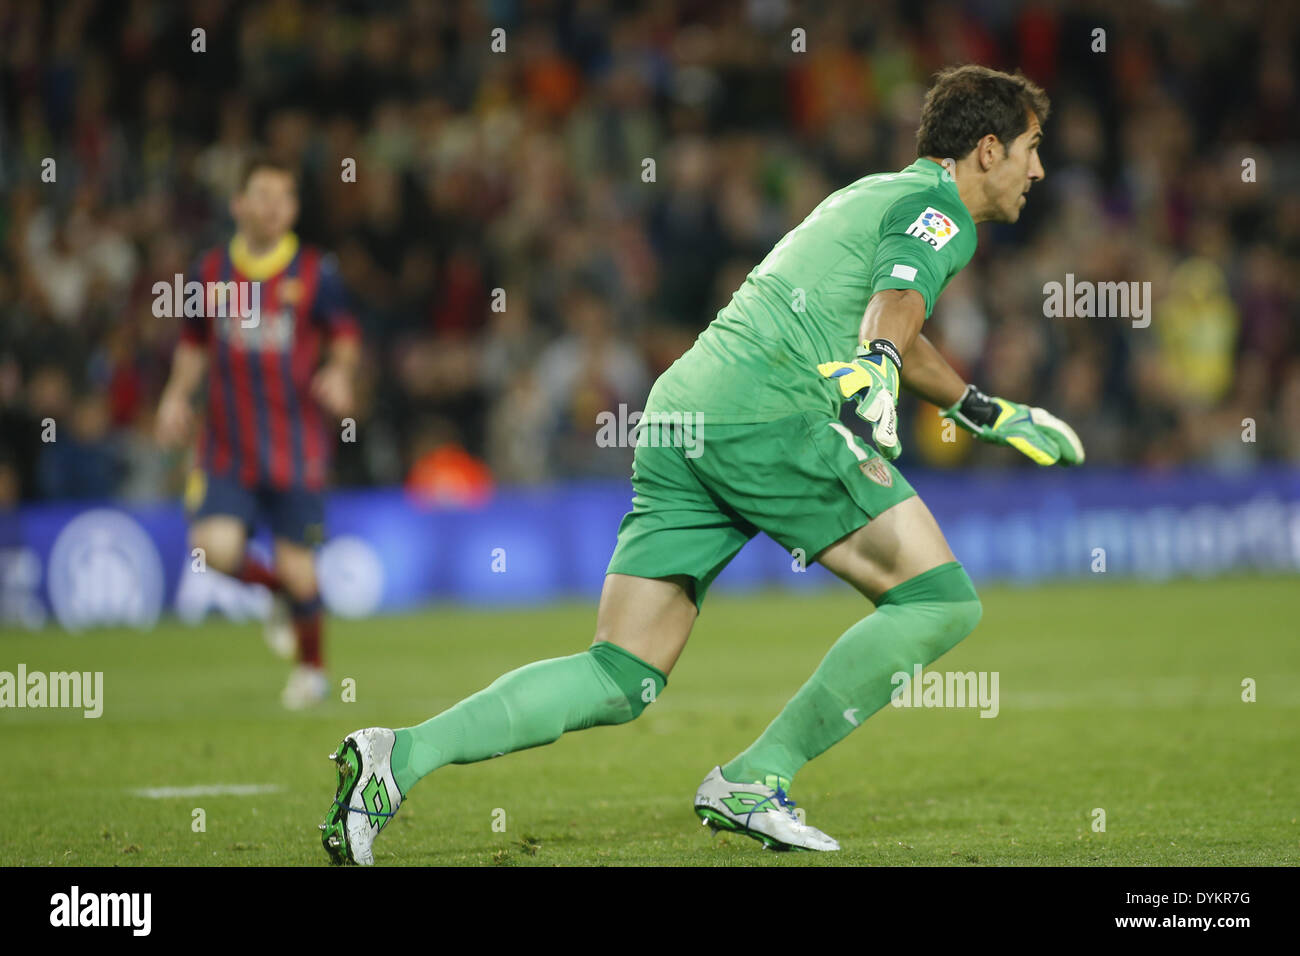 Barcelona, Spain. 20th Apr, 2014. BARCELONA-SPAIN -APRI 20: Goalkeeper, Iraizoz, during the match between FC Barcelona and Athletic Bilbao, corresponding to 34th week of the Spanish League played at the Camp Nou on April 20, 2014. (photo: Aline Delfim/Urbanandsport/Nurphoto) © Aline Delfim/NurPhoto/ZUMAPRESS.com/Alamy Live News Stock Photo